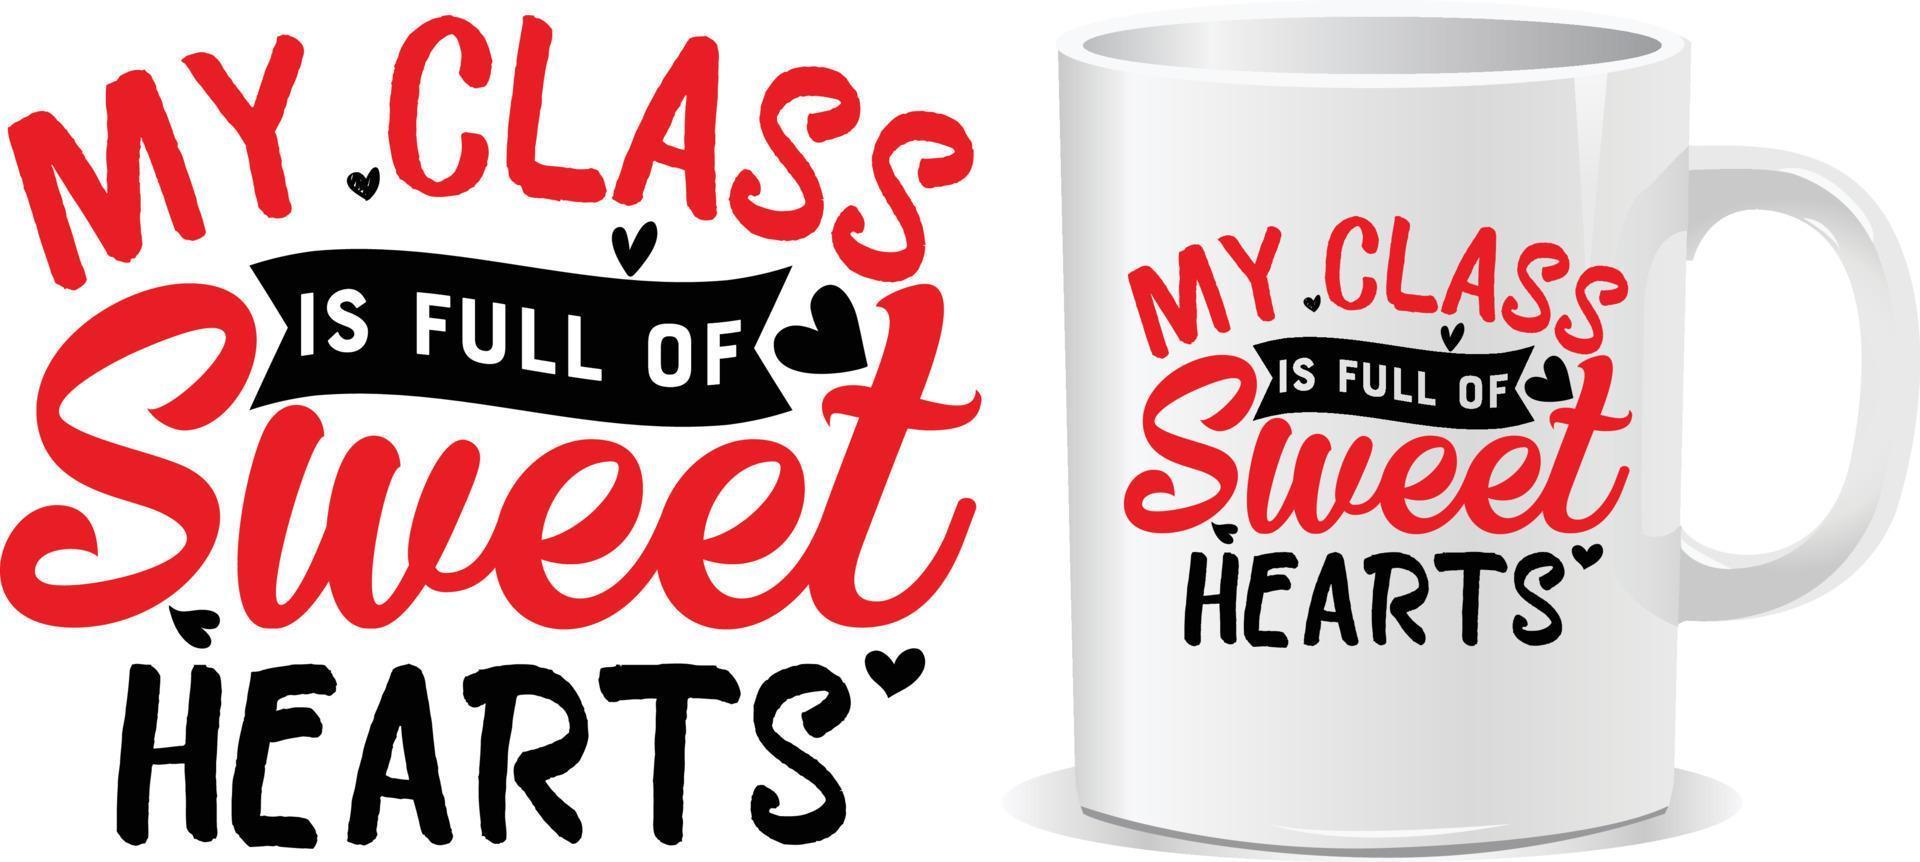 My class is full of sweetheart Happy valentine's day quotes mug design vector